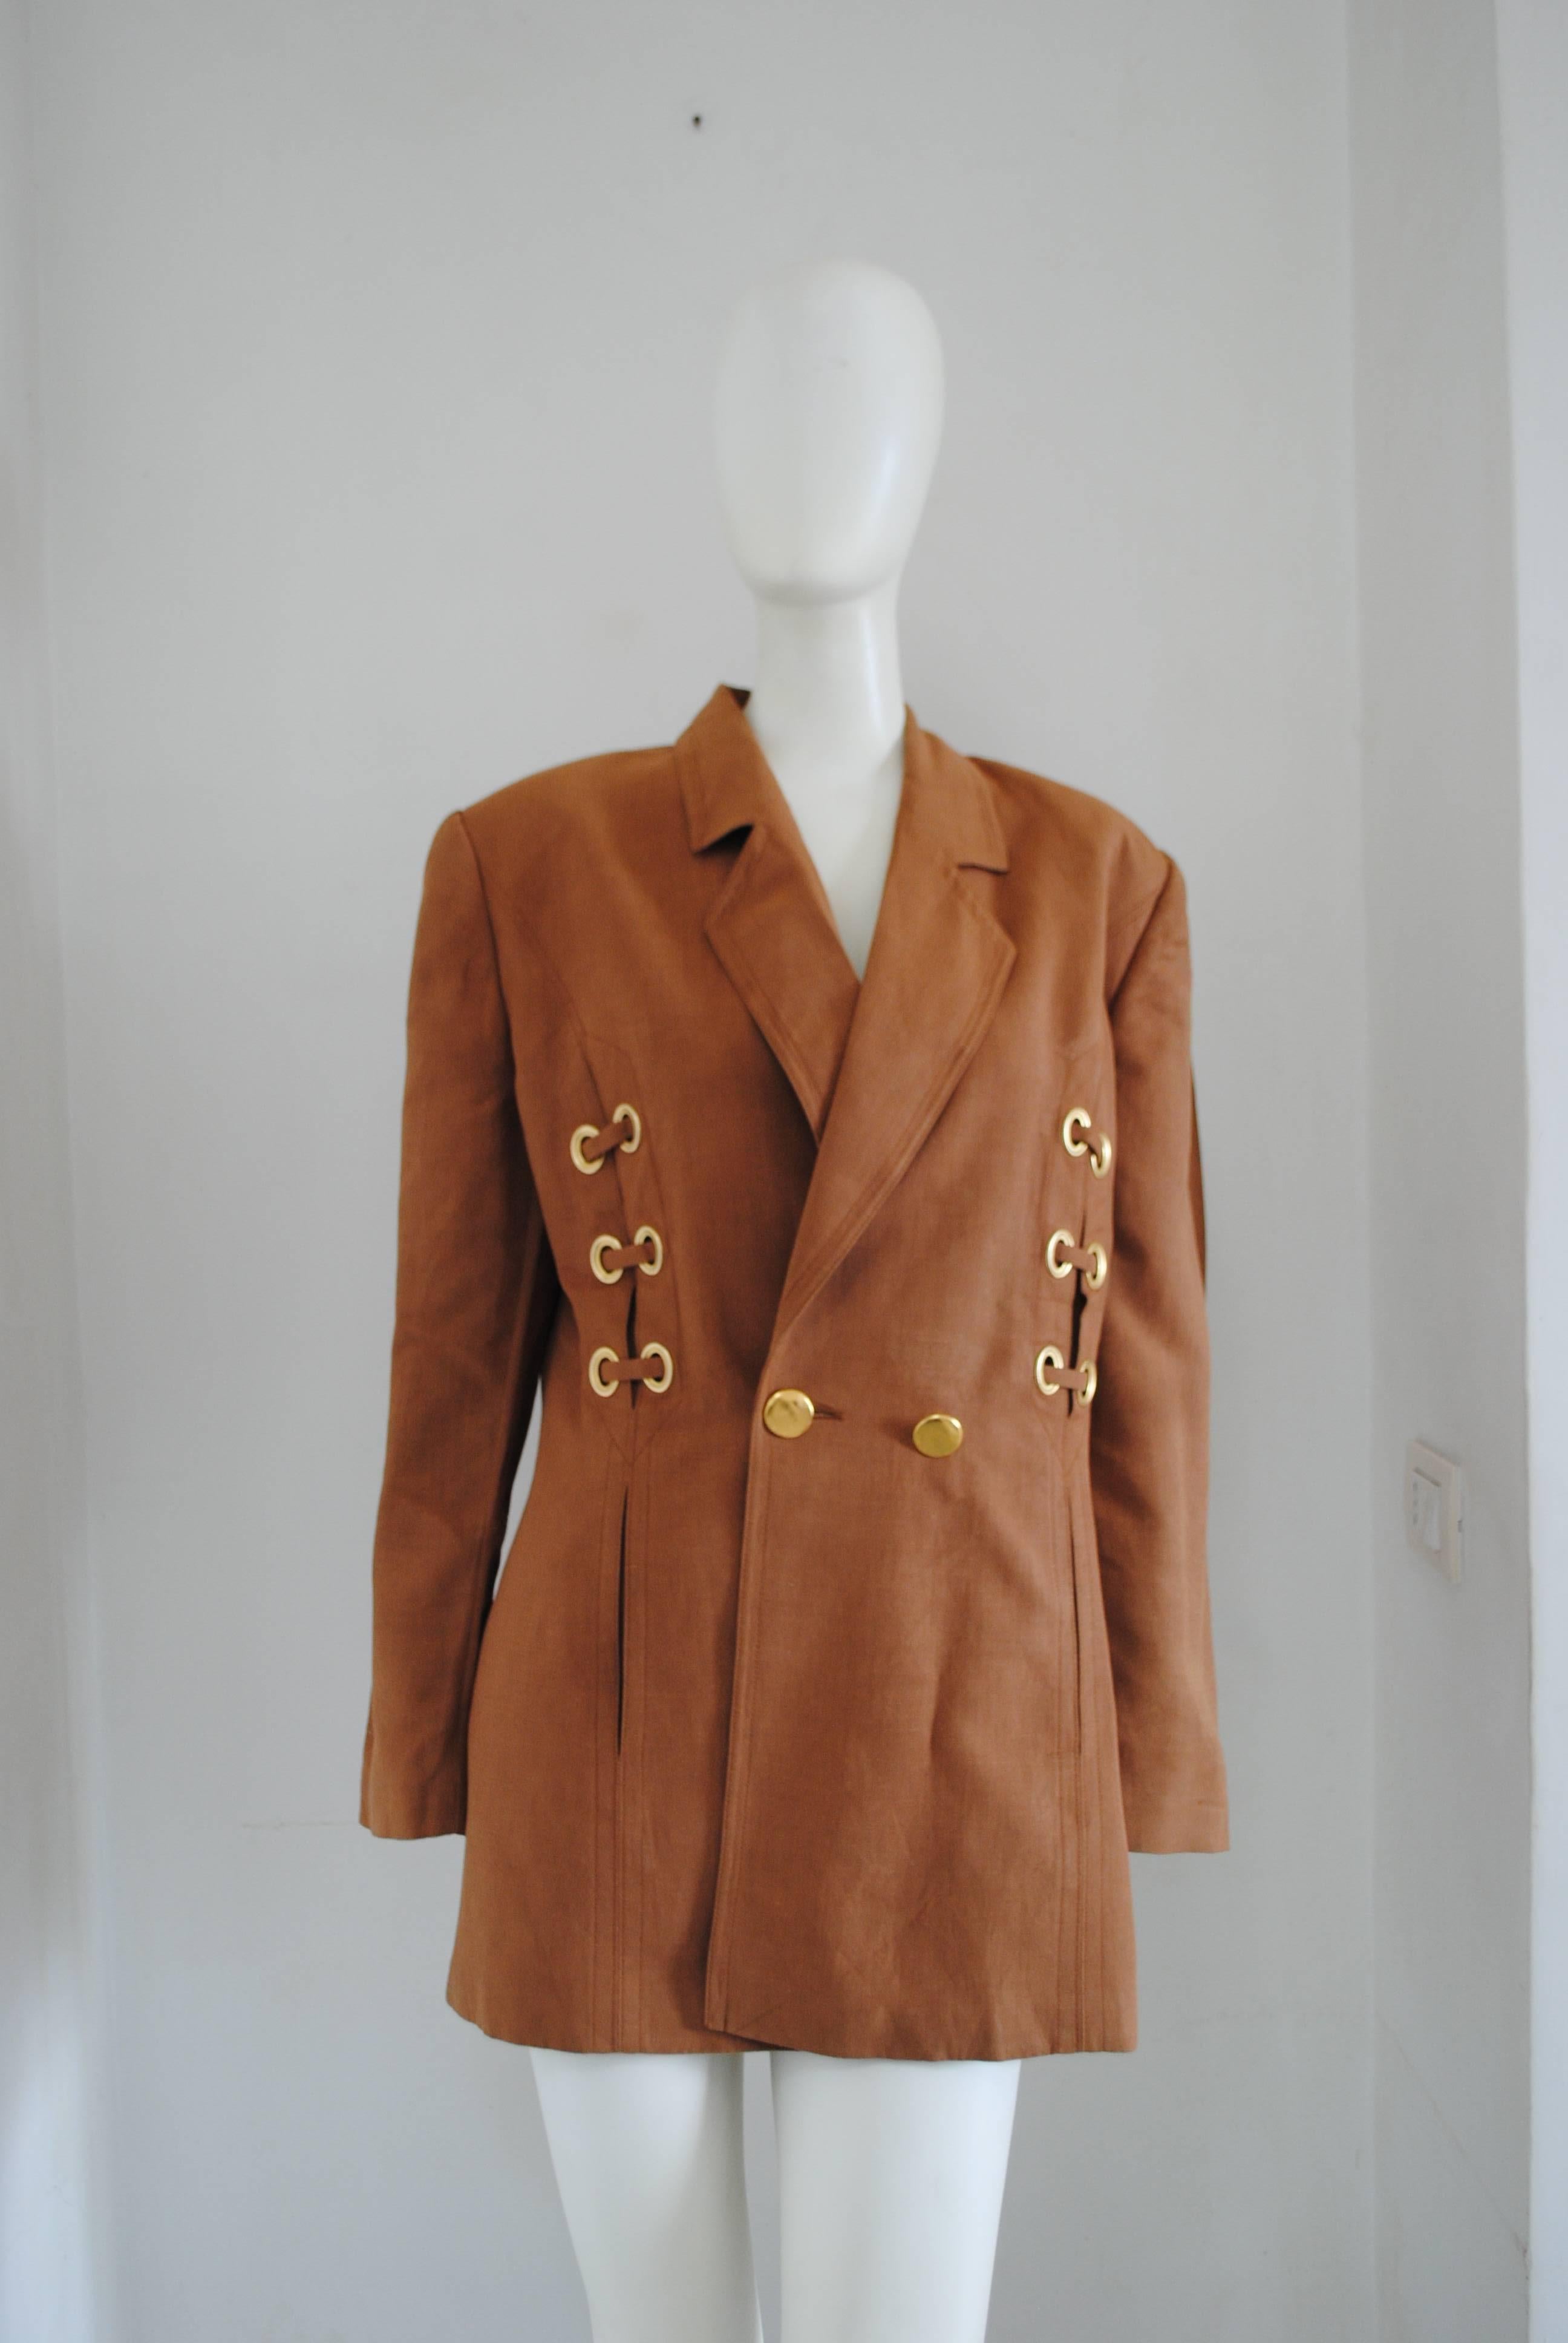 Louis Féraud Brown Gold hw Jacket

Totally made in Germany in size D 40 italian size range 46

Composition: Viscose and Linen